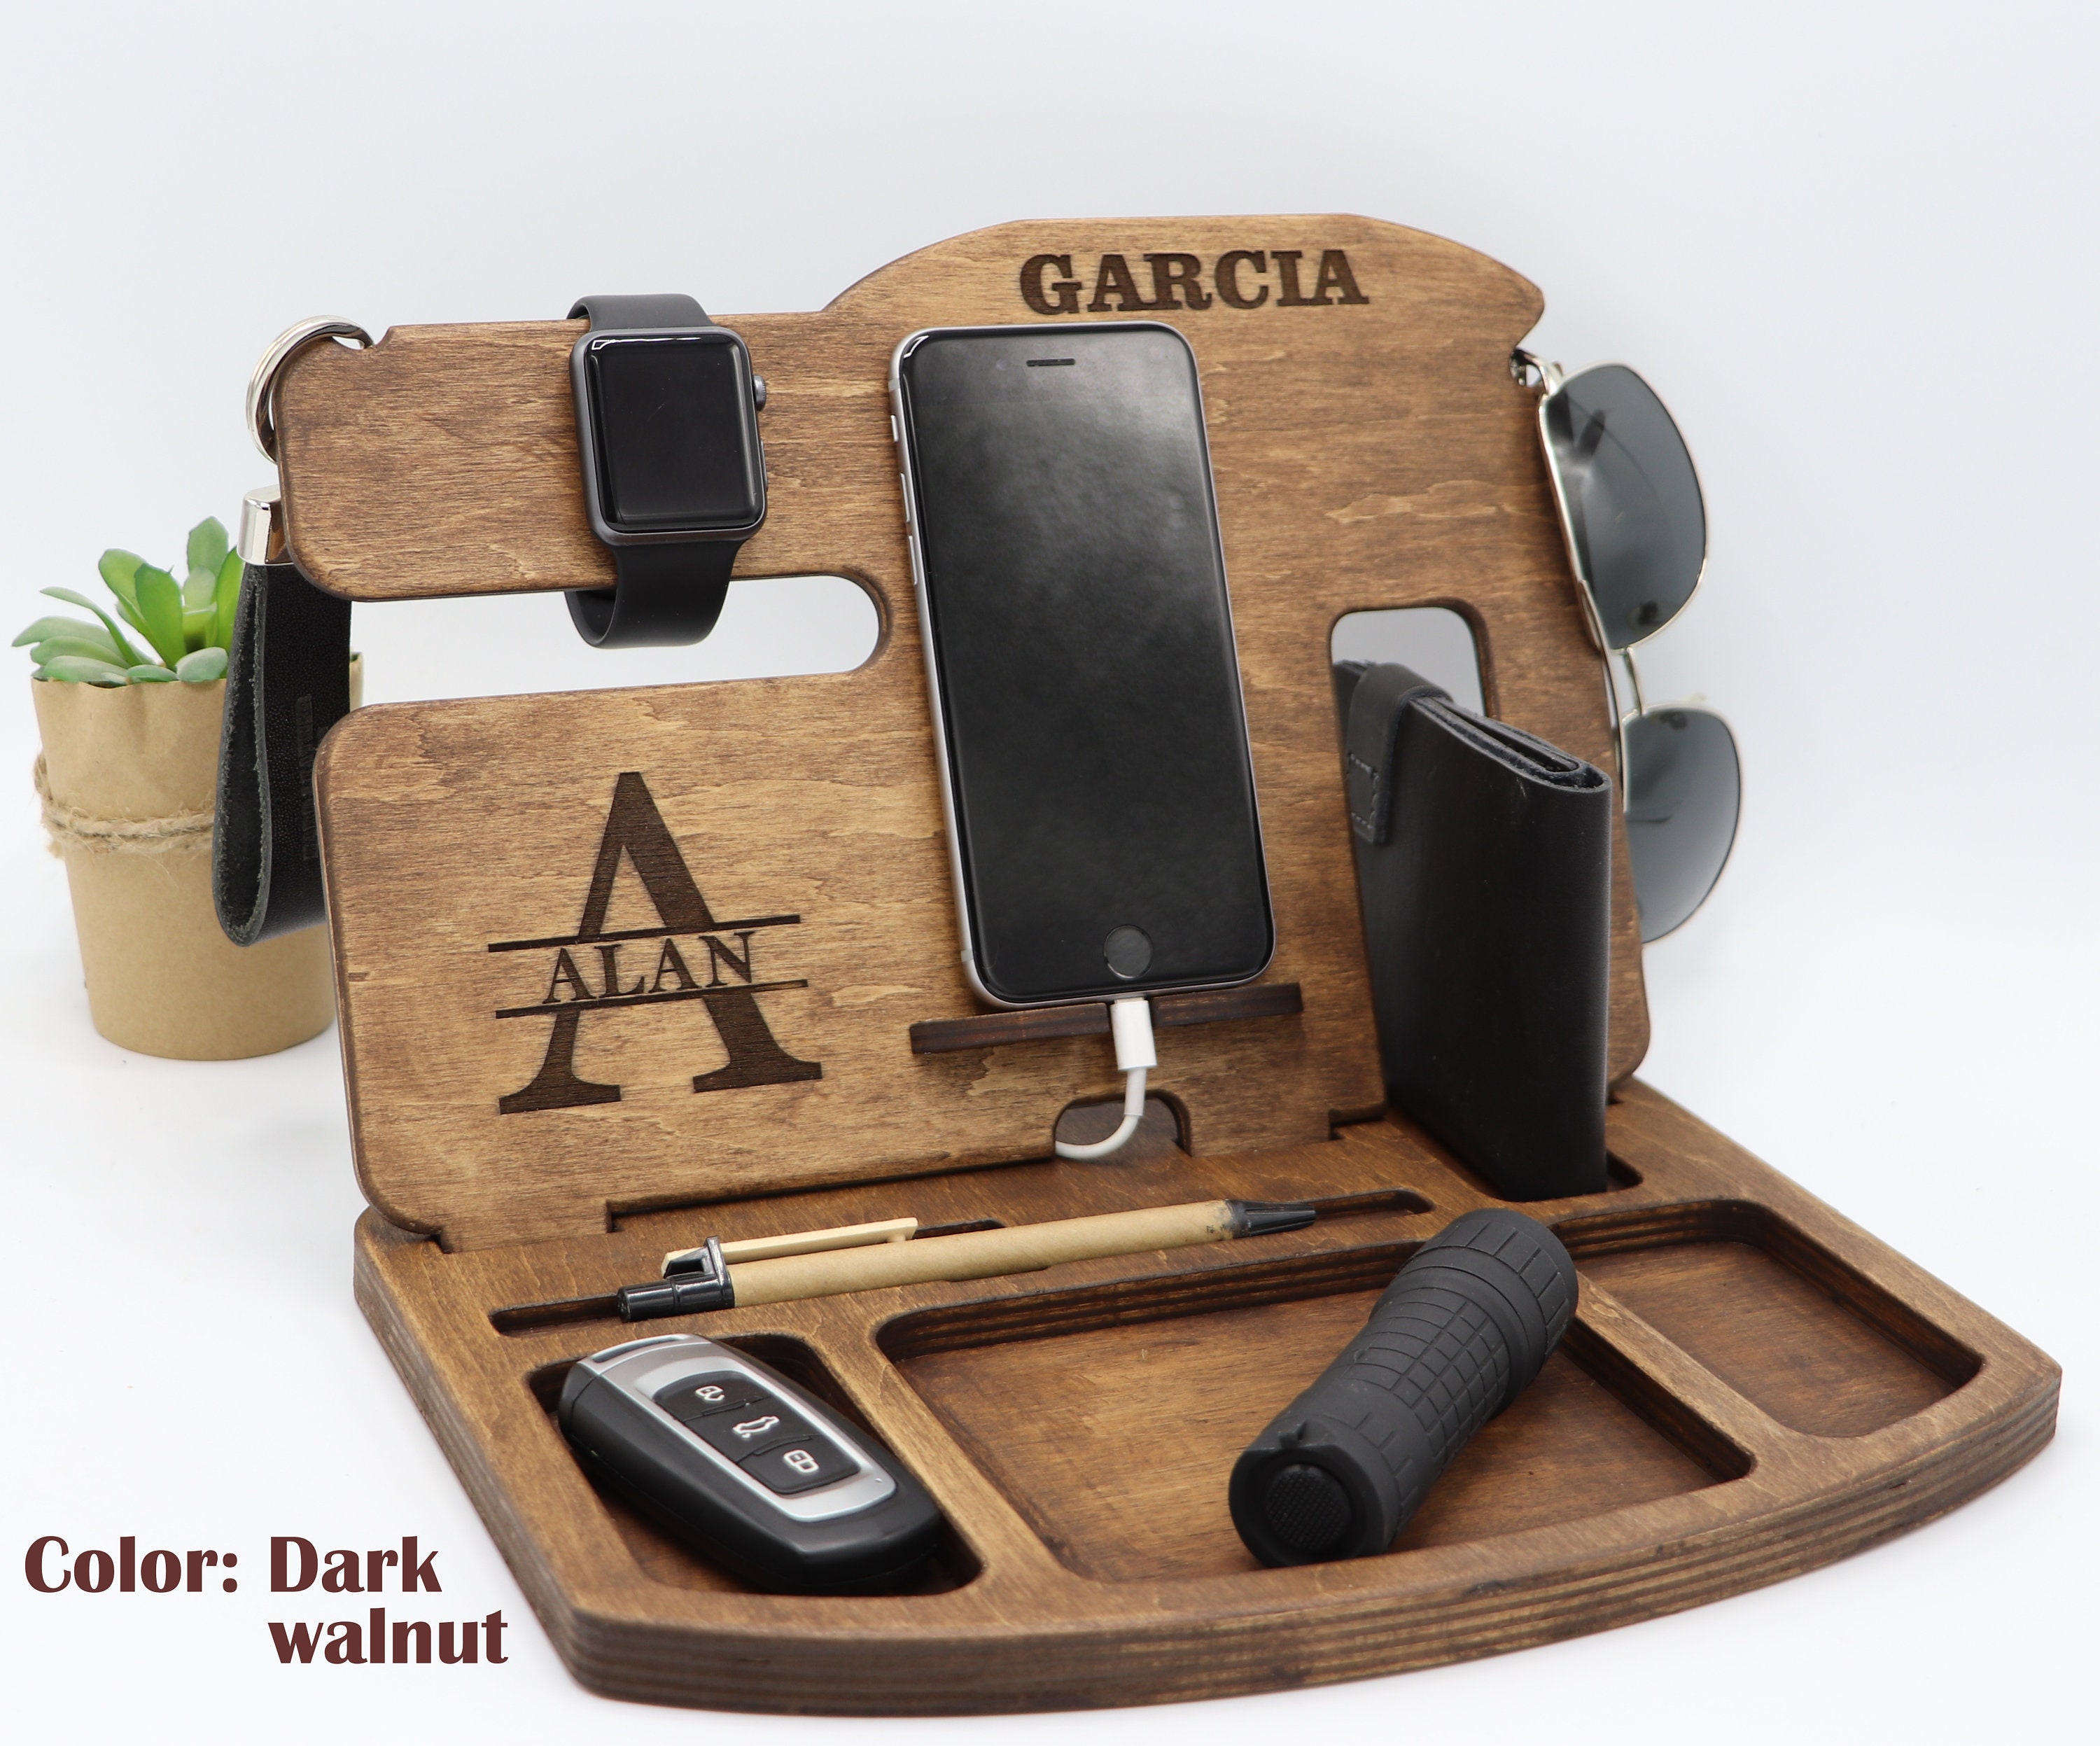 Anniversary Gift Gift for Men Personalized desk organizer Wooden Docking Station Unique holiday gift Birthday Gift Wood docking station Nightstand Docking Station Fathers Day Gift 